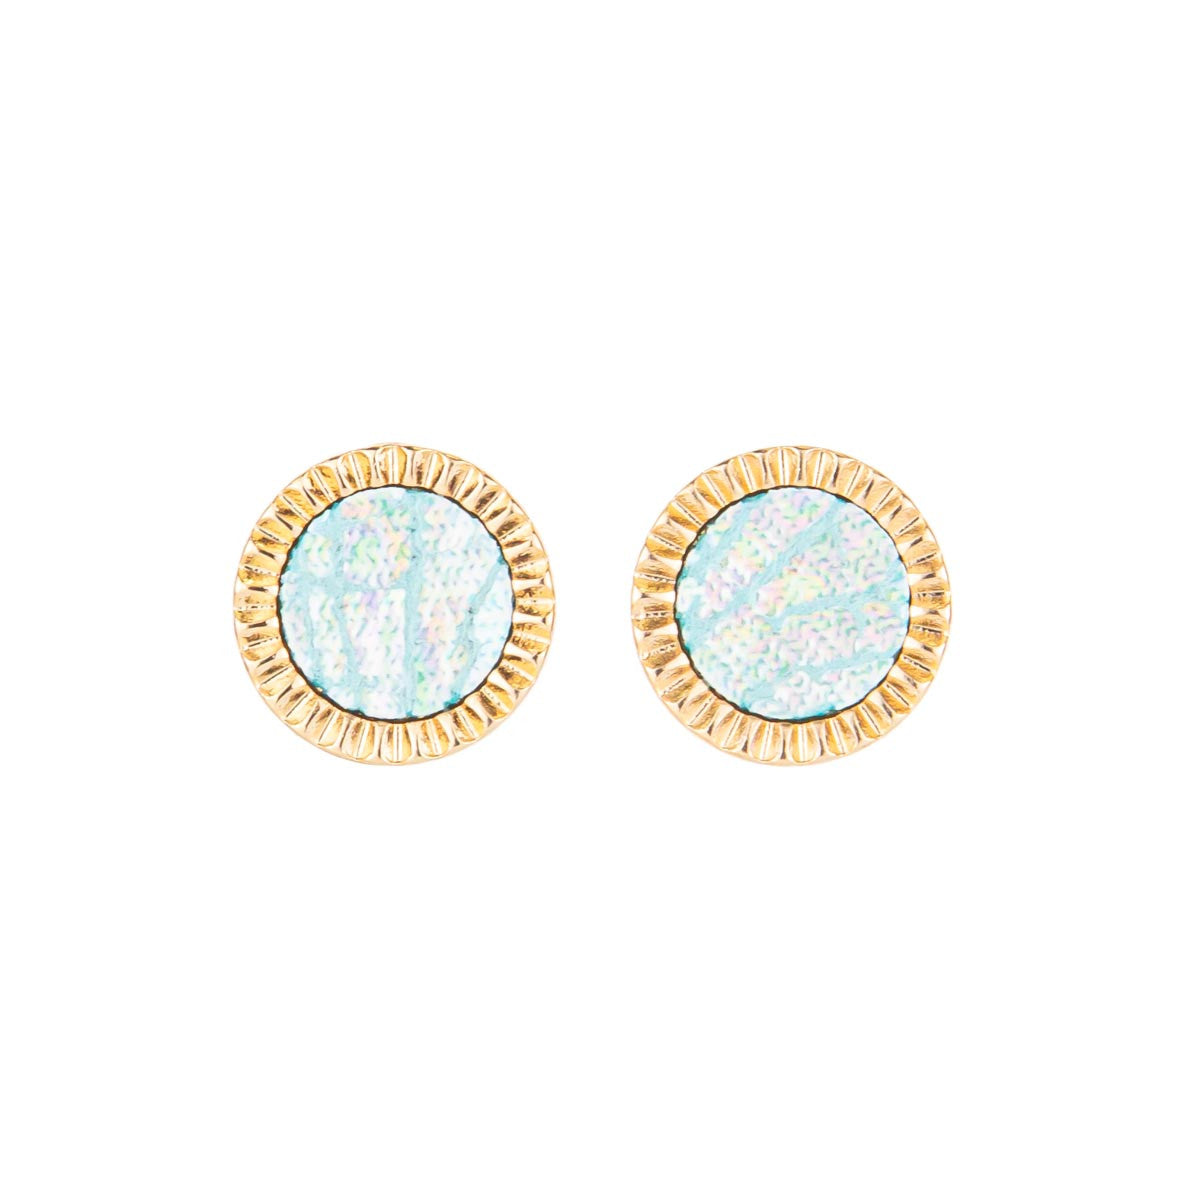 Beauvais Stud Earrings in Gold/Blue